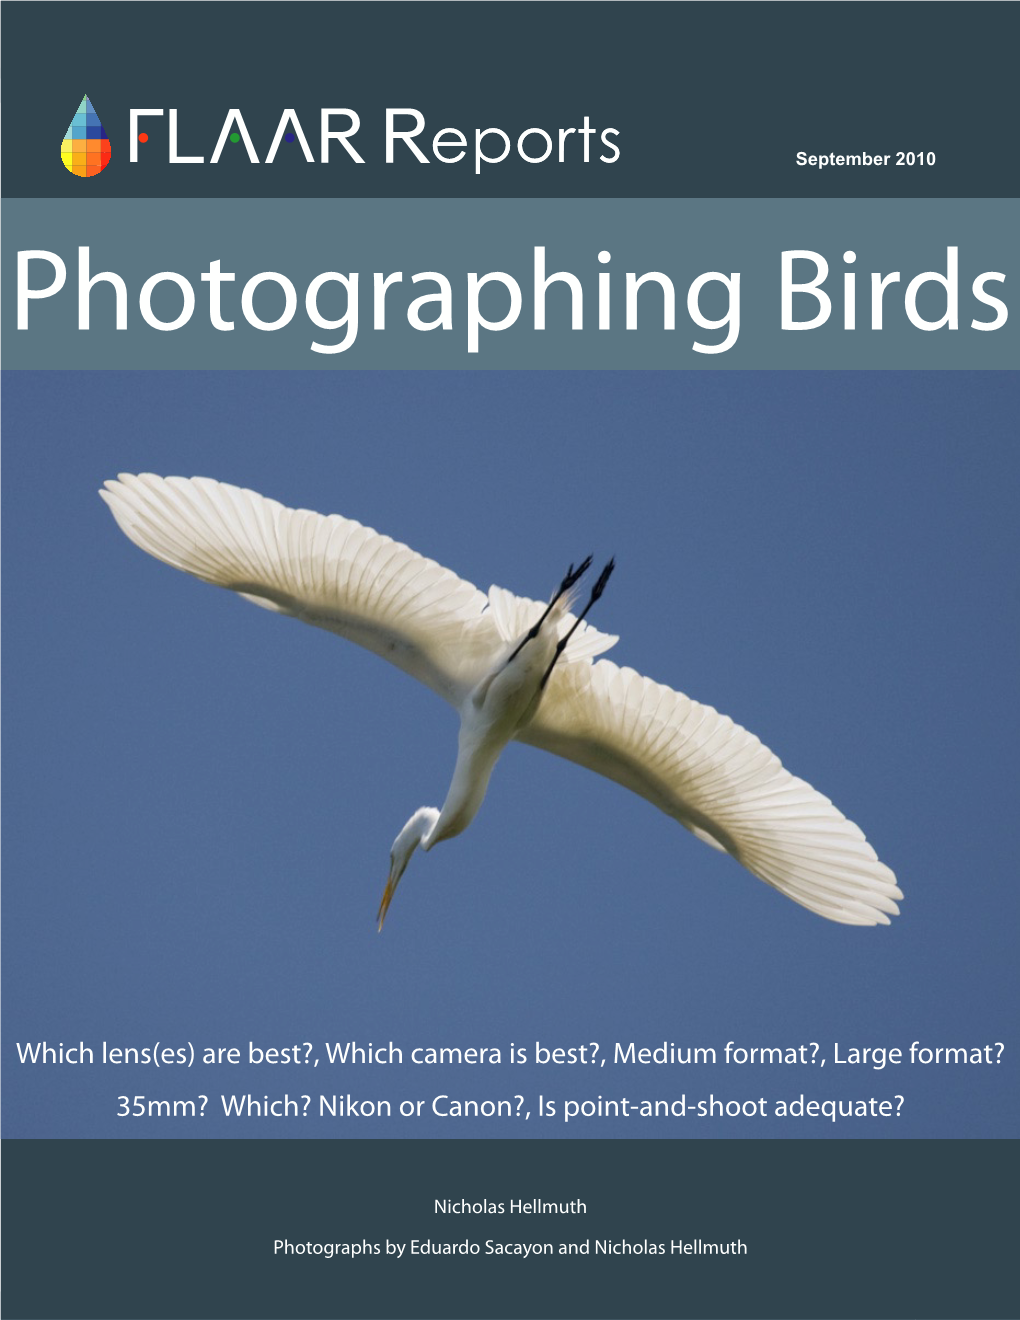 Photographing Birds Nature Photography Canon EOS 1Ds Mark